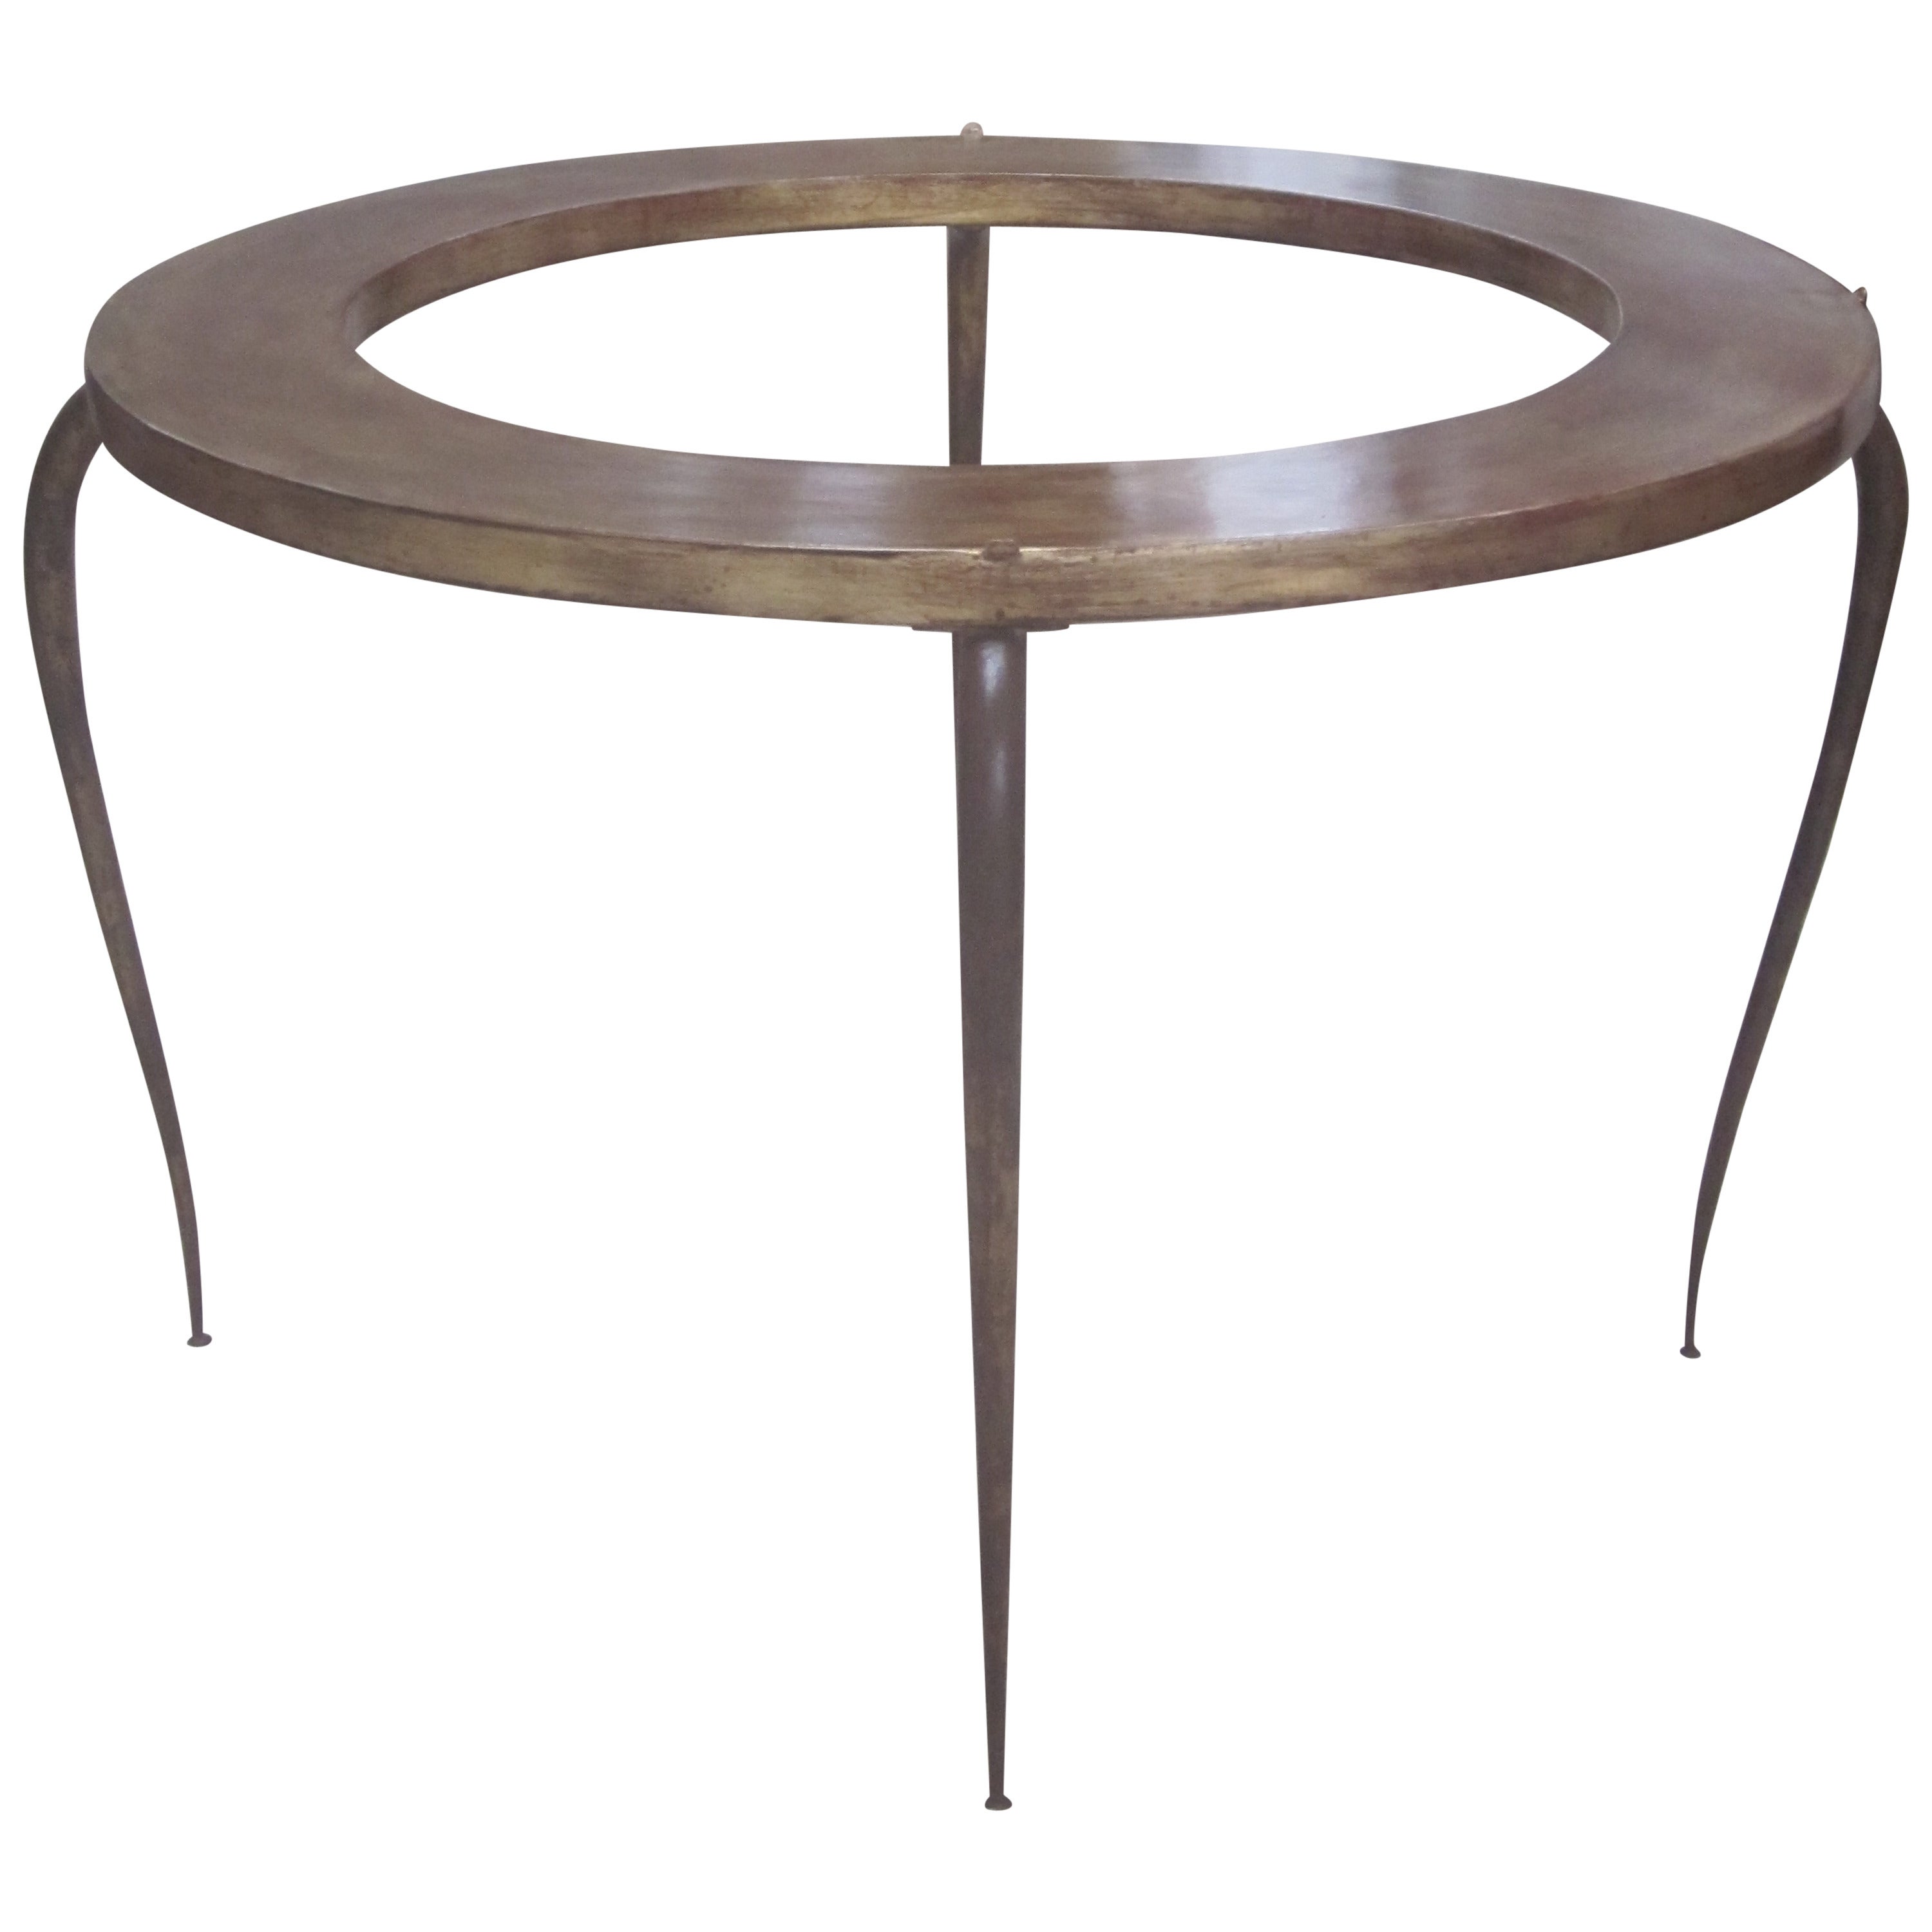 French Mid-Century Modern Round Gilt Iron Coffee Table by Rene Prou, 1940 For Sale